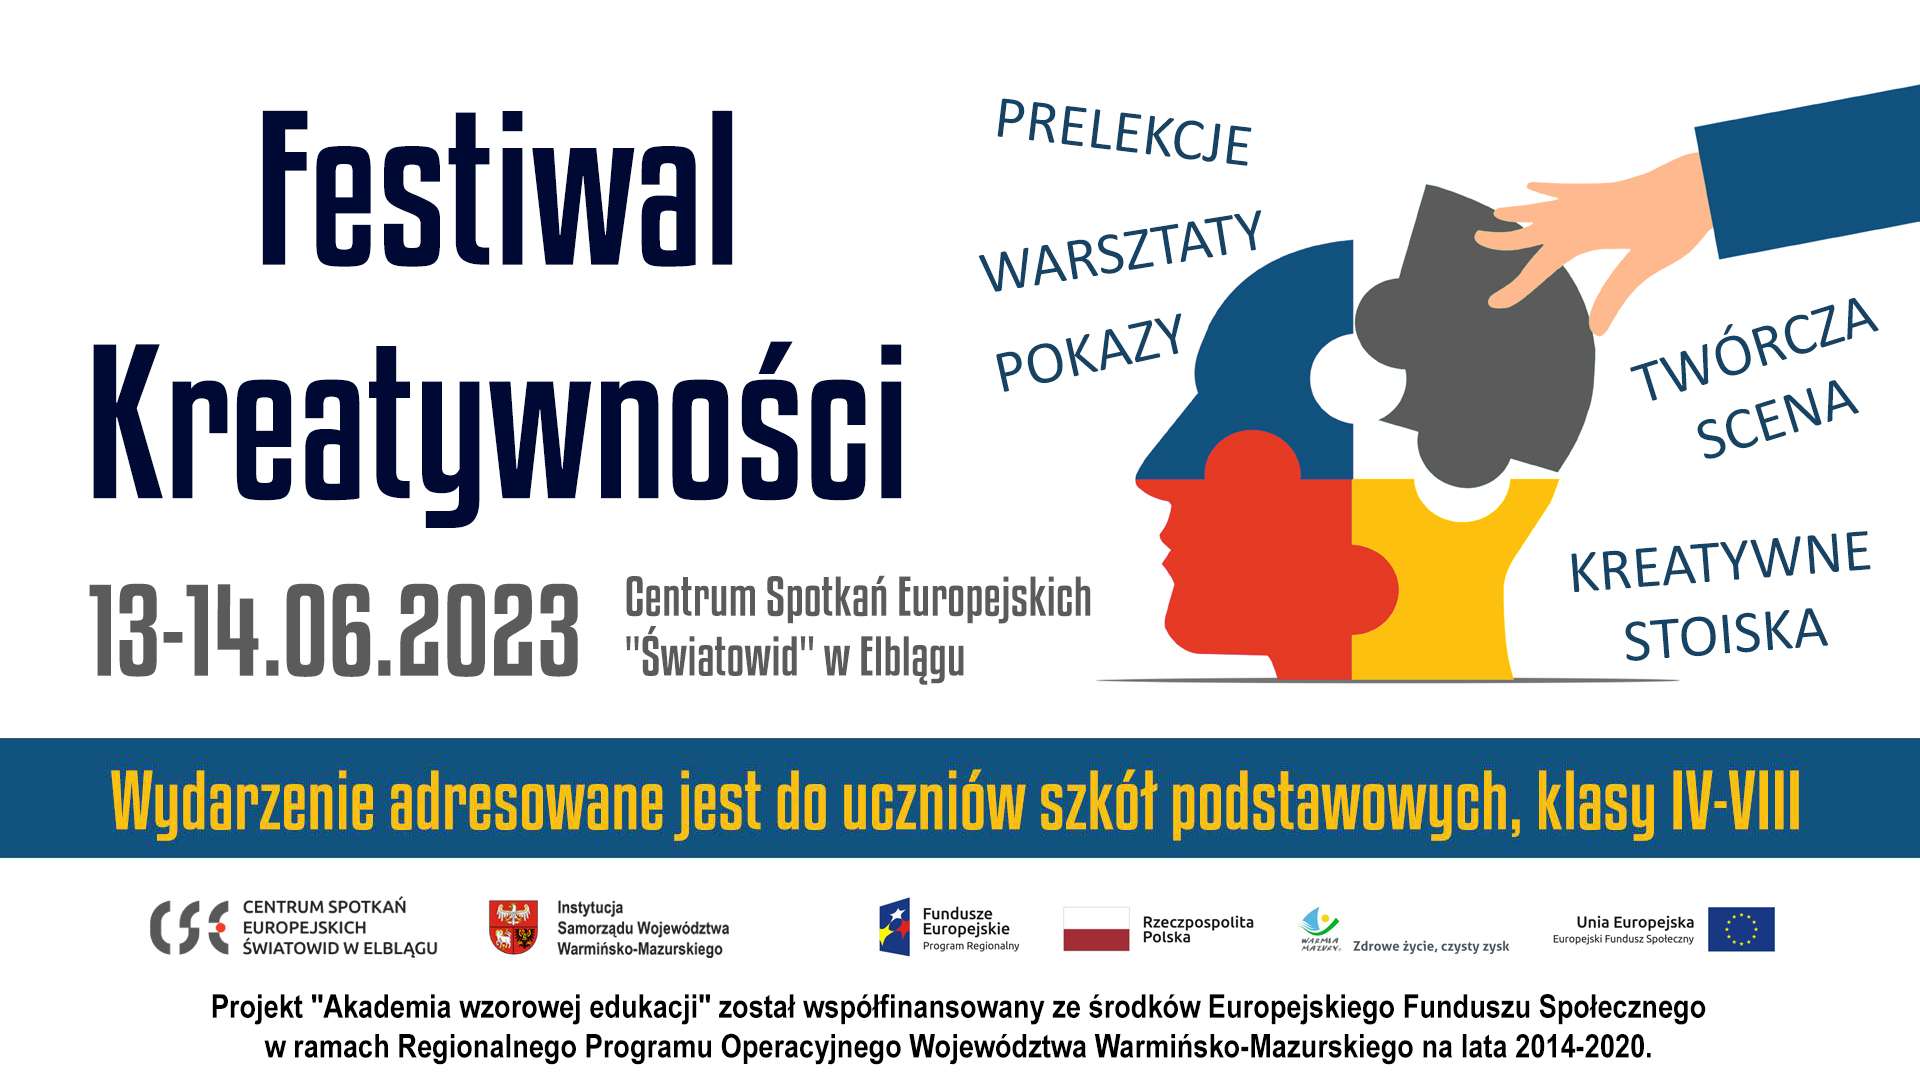 Take part in the Festival of Creativity 2023!